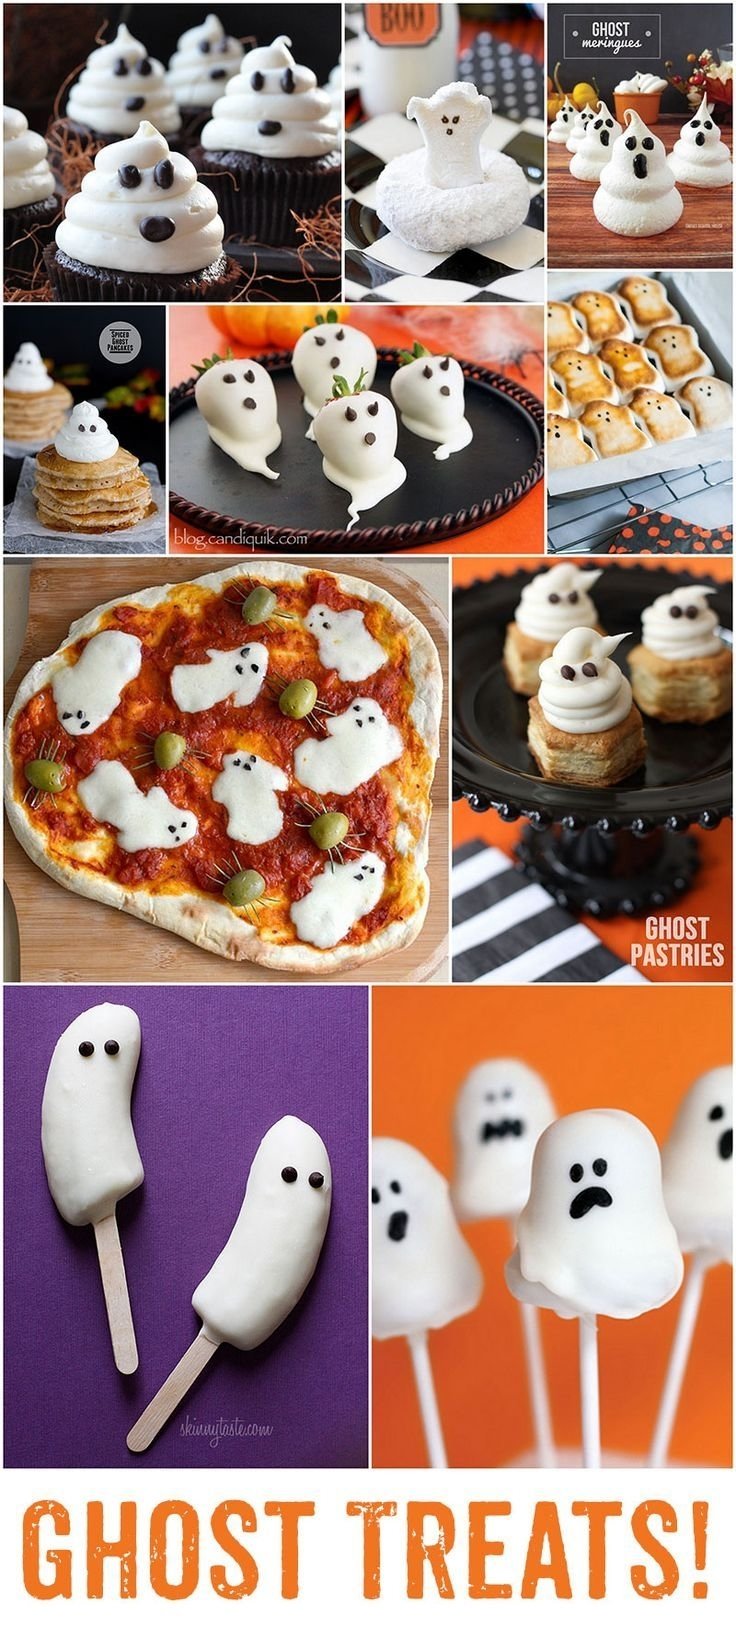 10 Elegant Ideas For What To Be For Halloween 629 best halloween party ideas images on pinterest halloween prop 3 2022